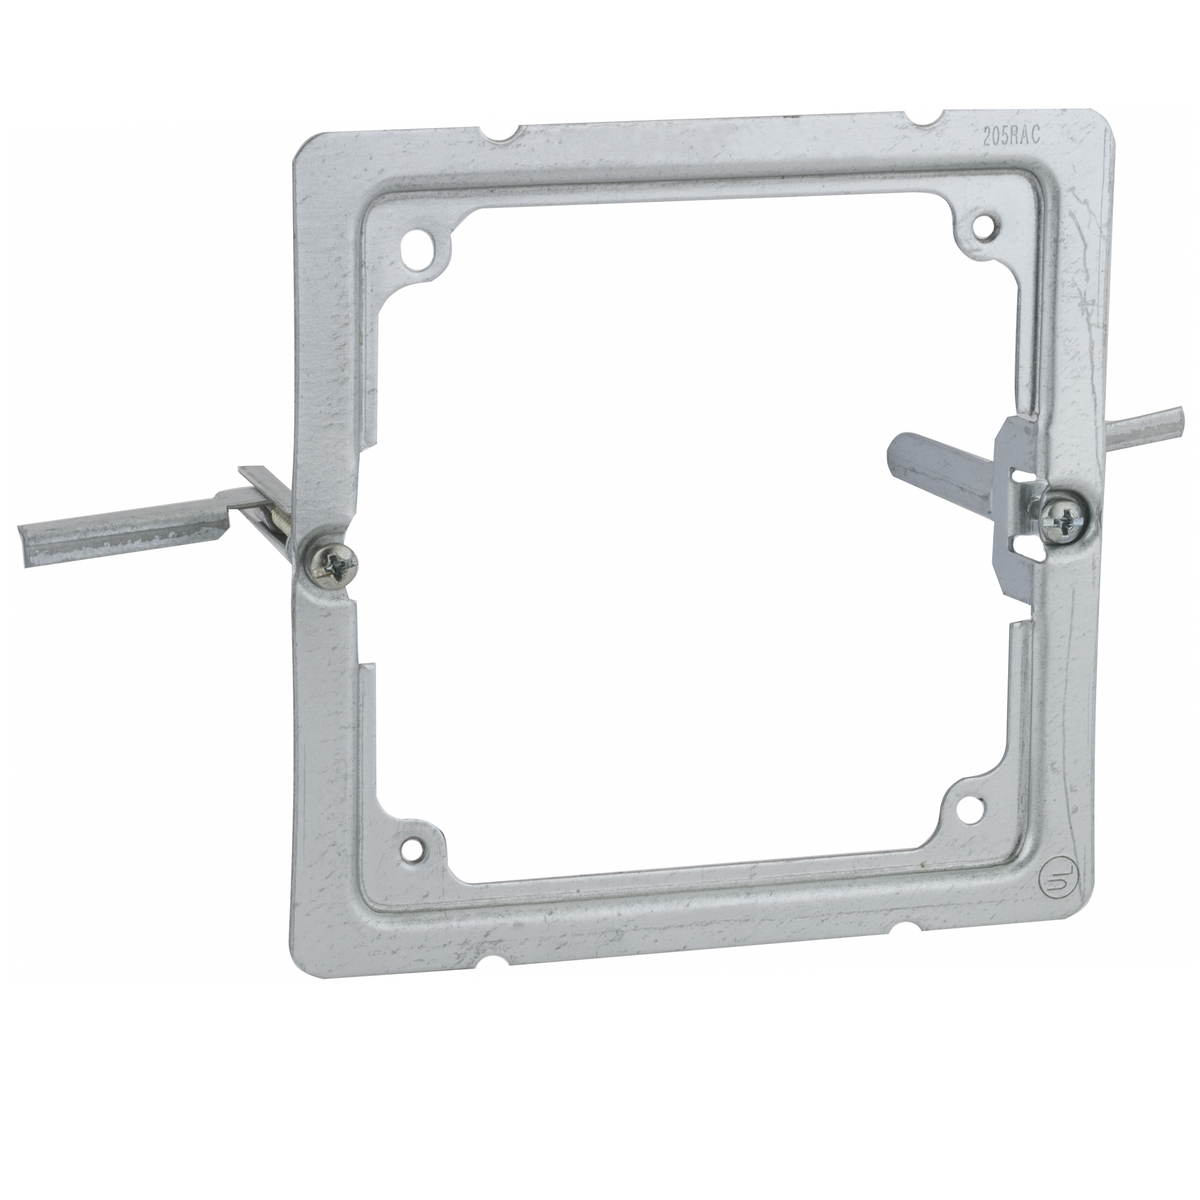 Old Work, 4 In. Sq. Box Mounting of Life Safety Support, Life SafetySteel Wall Box Mounting Brackets